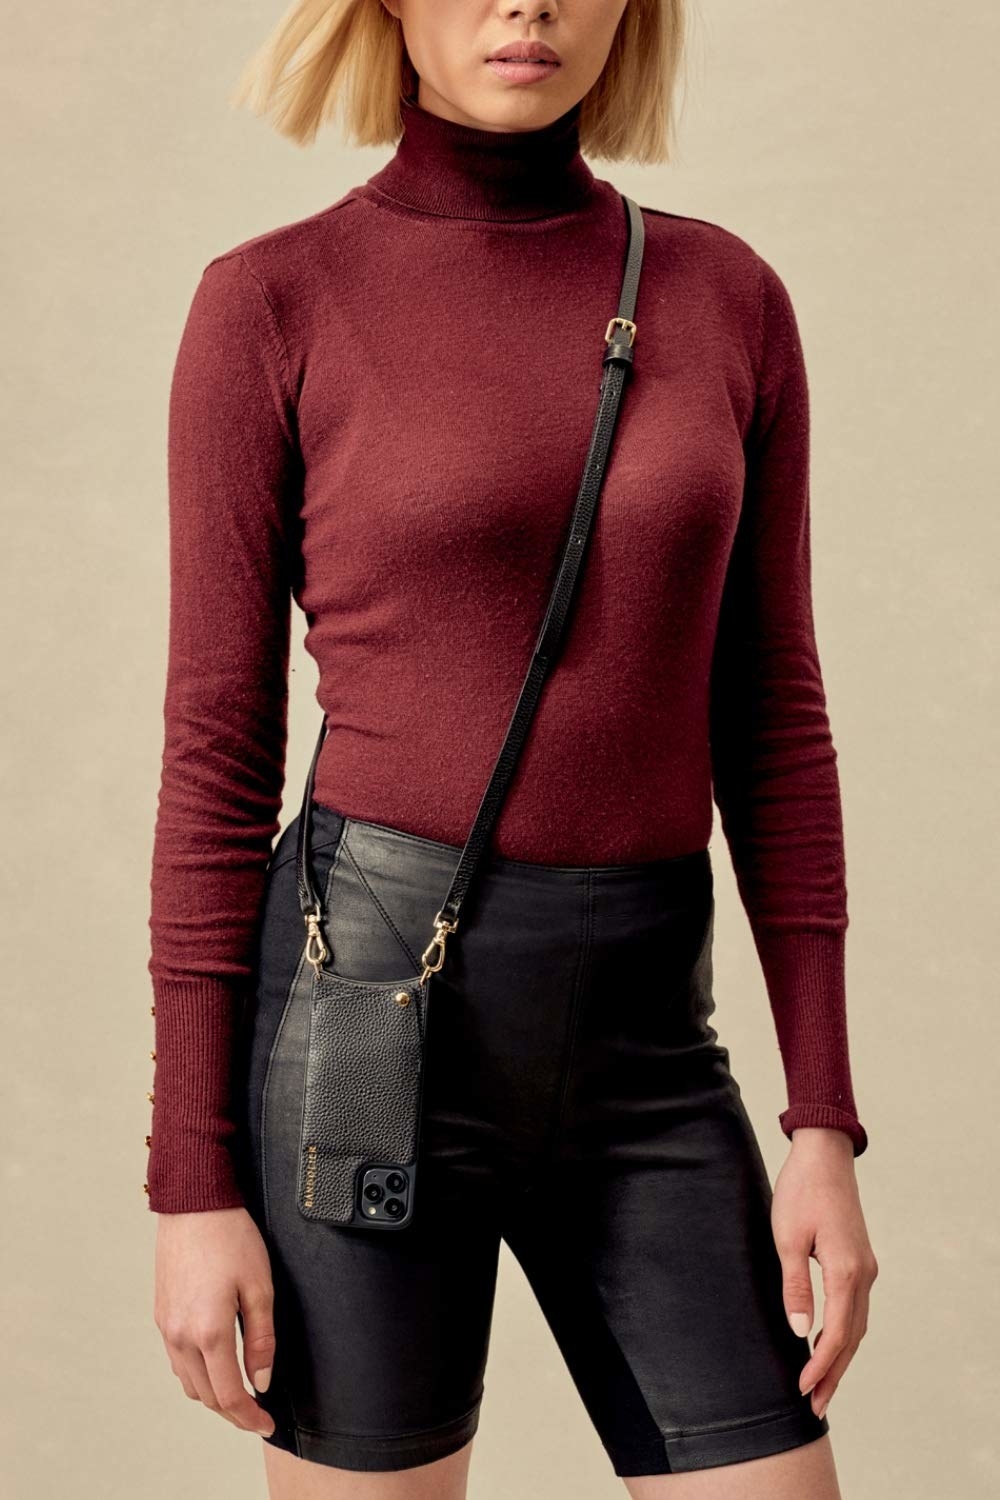 model with the black leather strap across their chest with the phone case with a pocket on the back